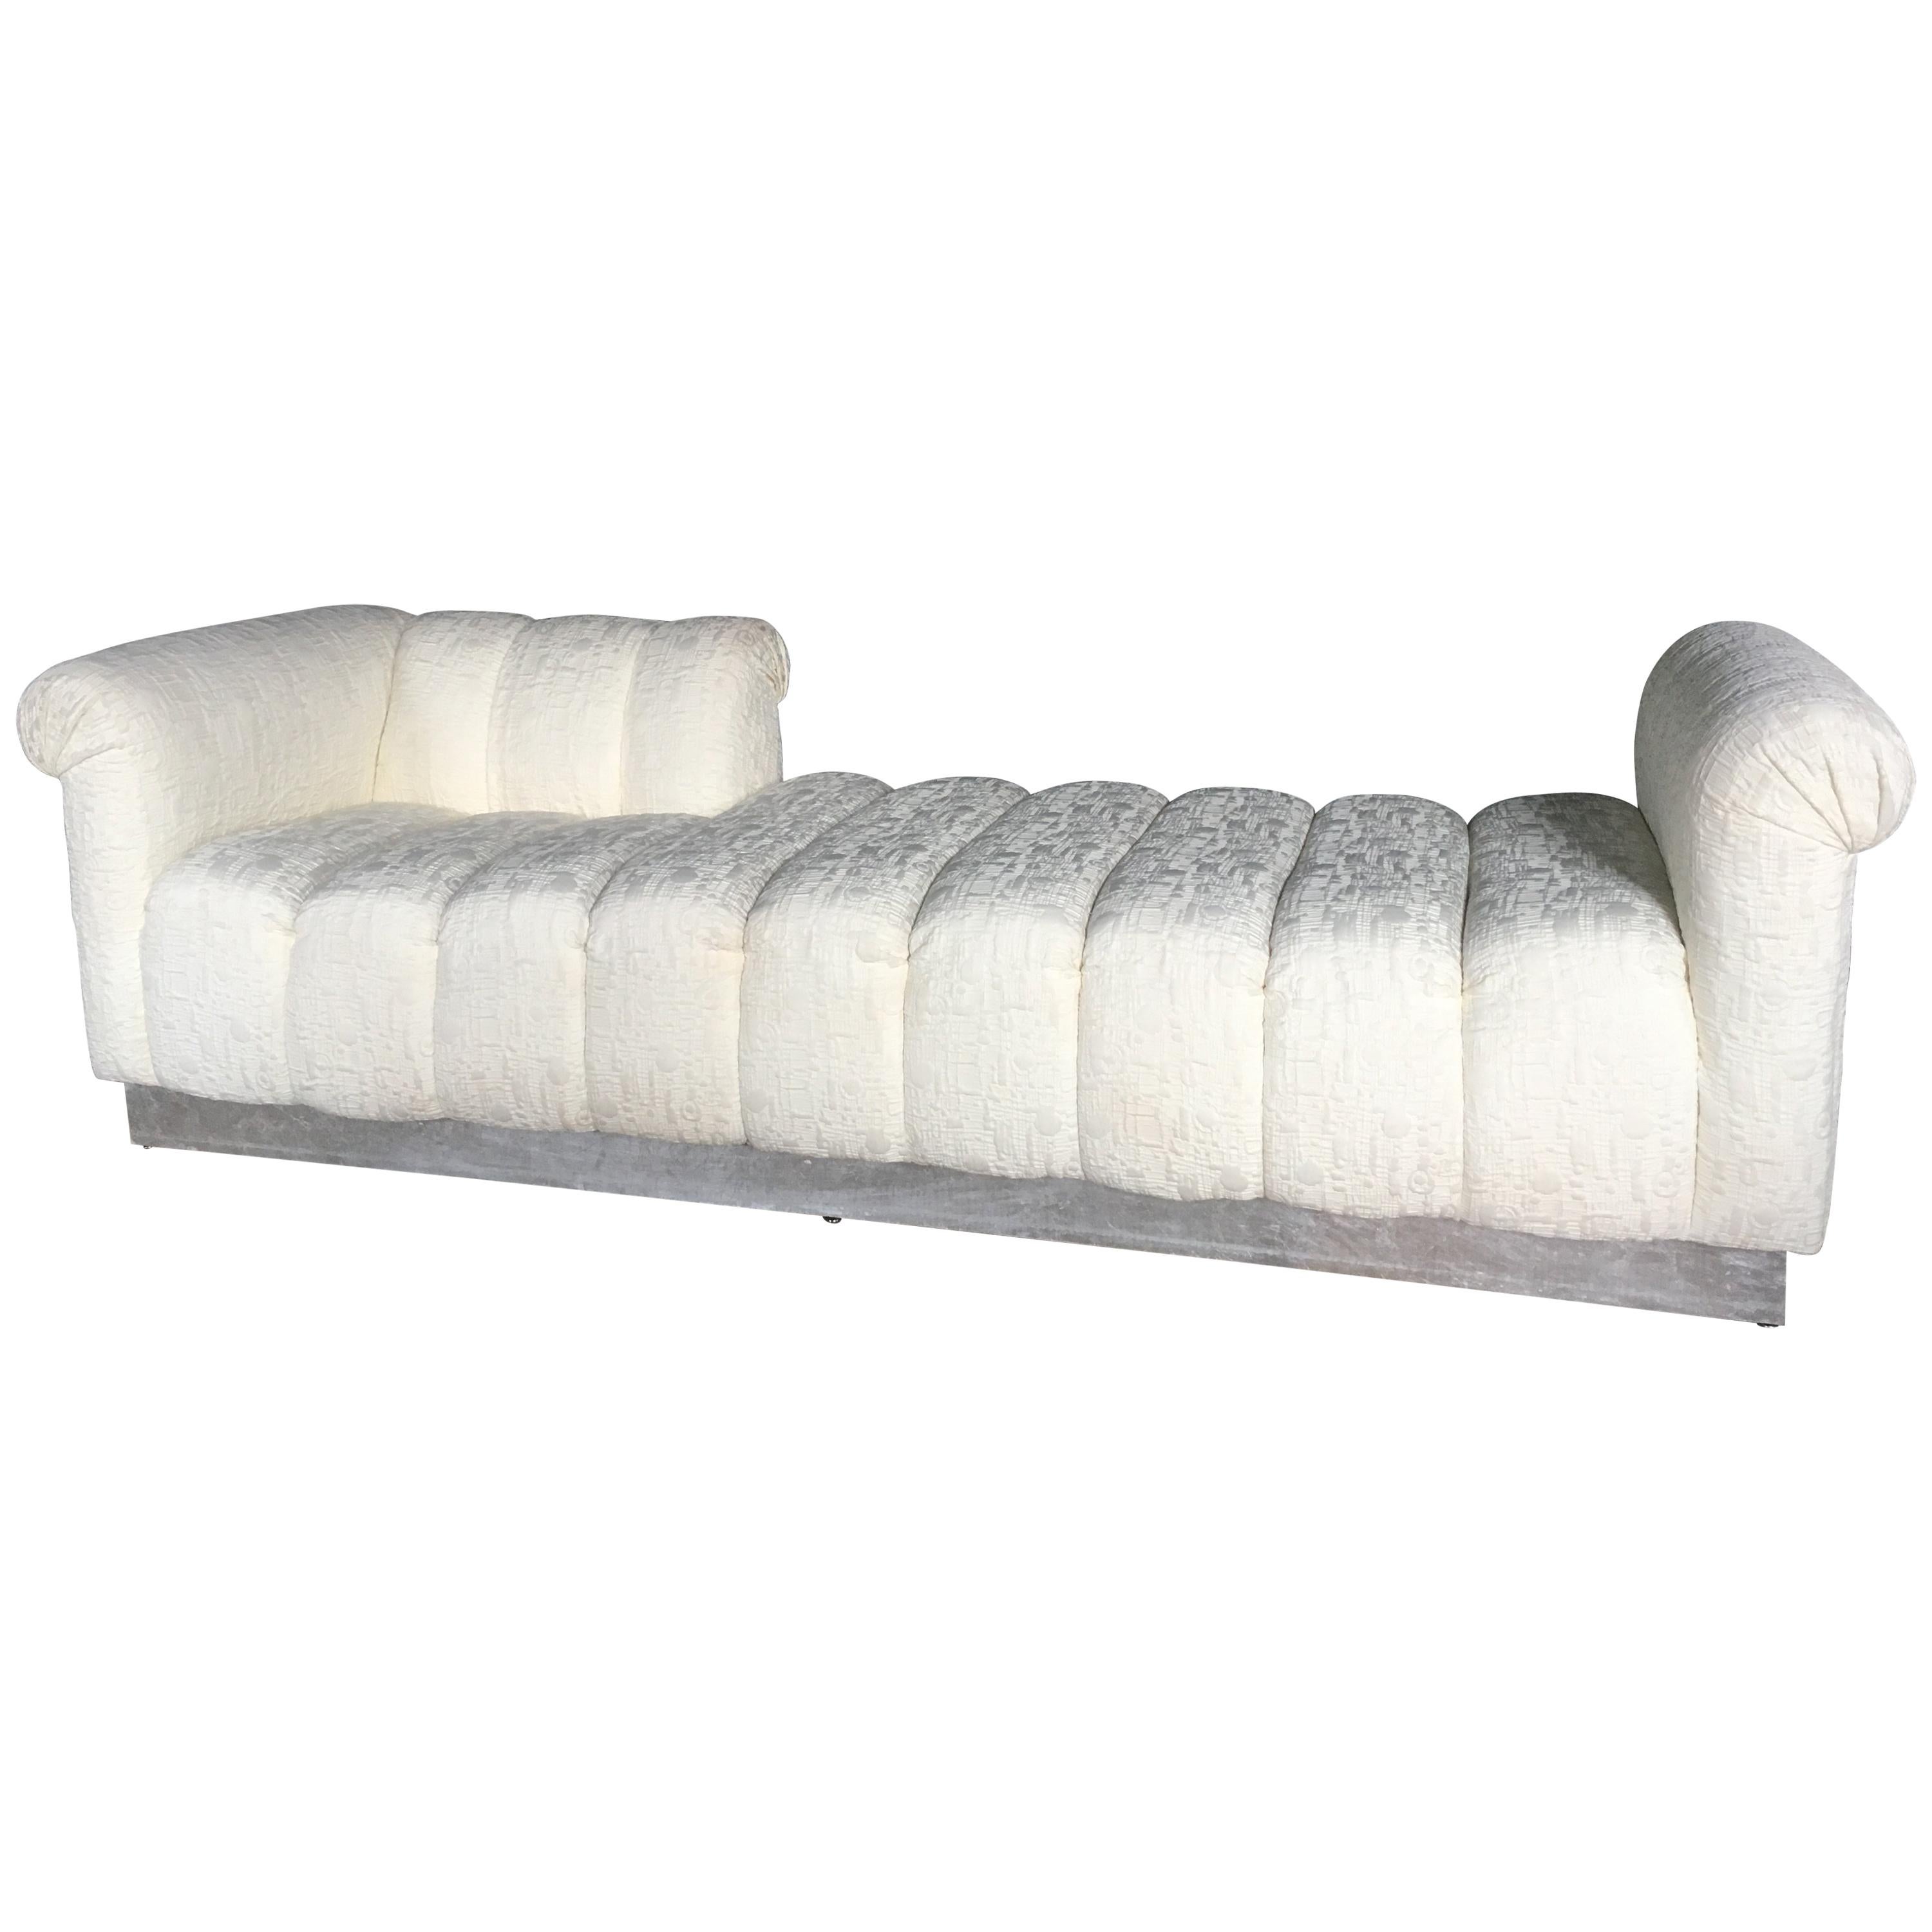 Fabulous Over-Sized Channel Tufted Chaise or Lounge Fainting Couch